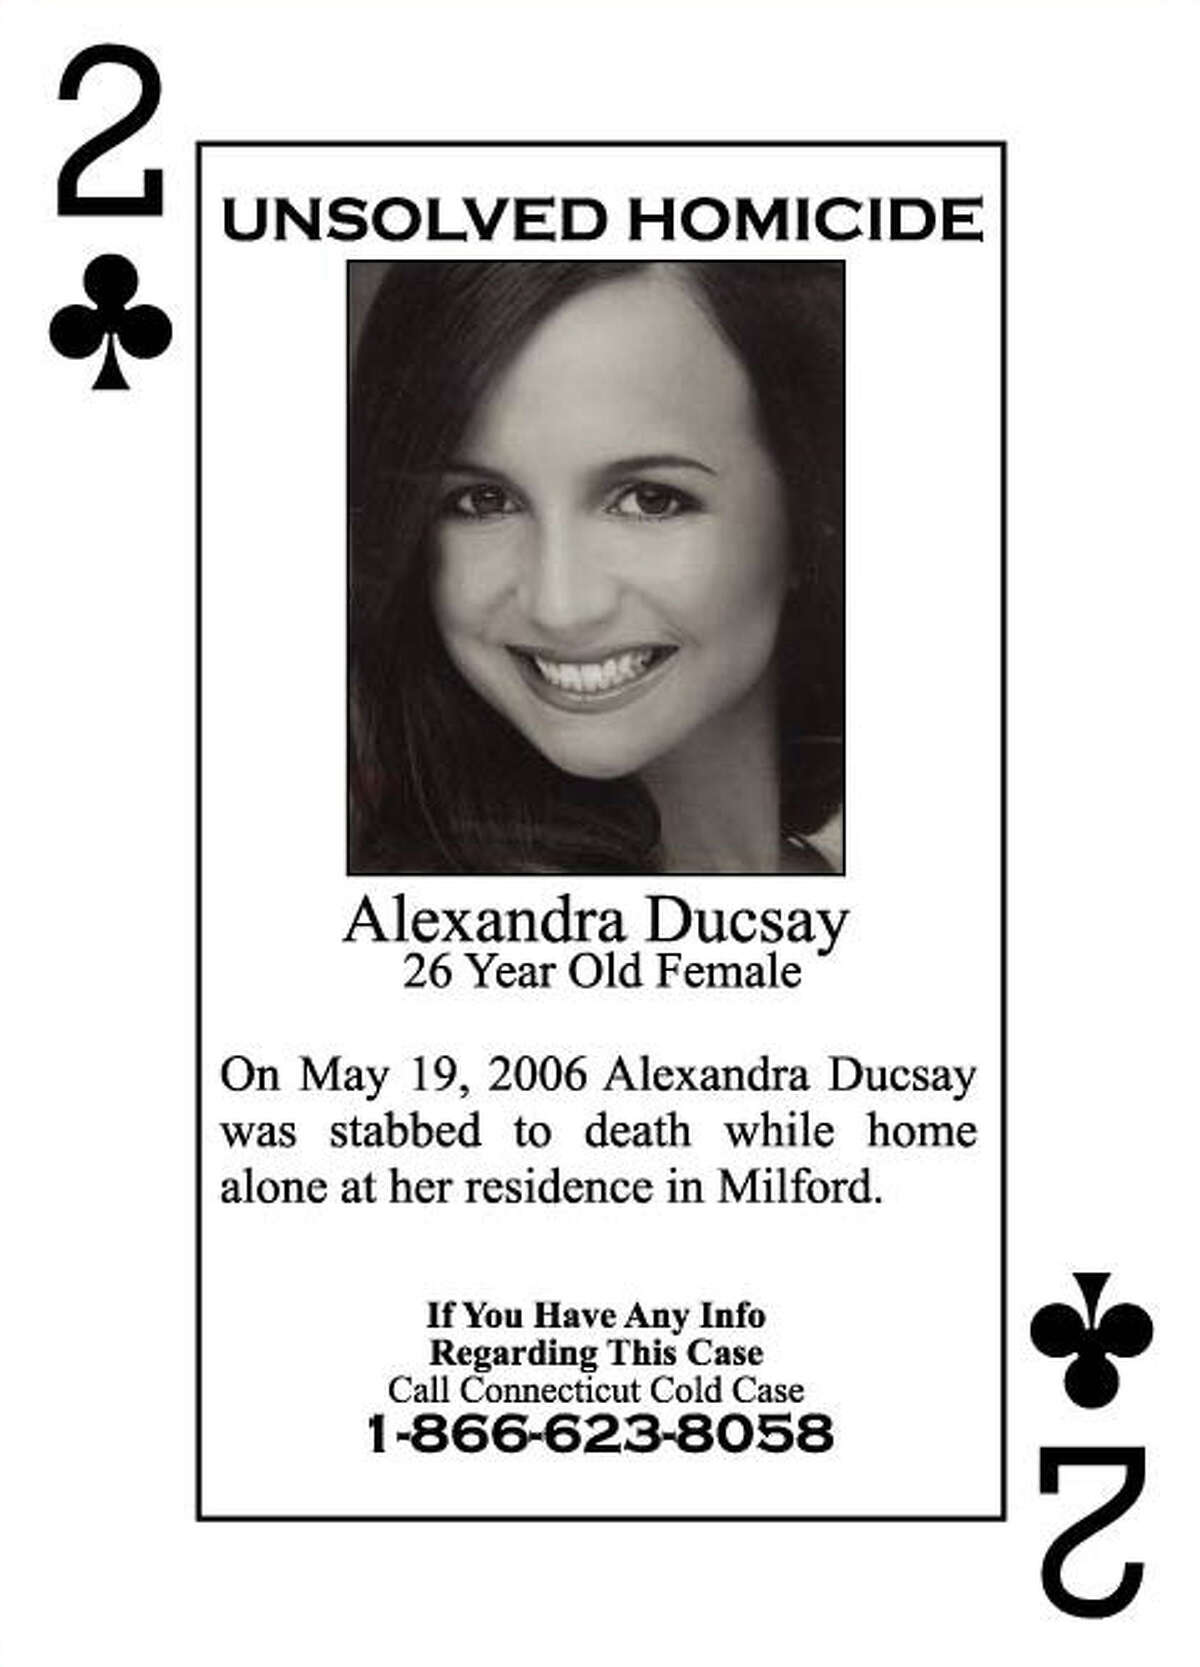 Alexandra Ducsay’s photo is on the two of clubs, in a deck of playing cards depicting victims of unsolved murders. The cards are distributed to inmates in the state’s prisons in the hope that they will generate tips or leads. Ducsay was murdered in her Devon home five years ago